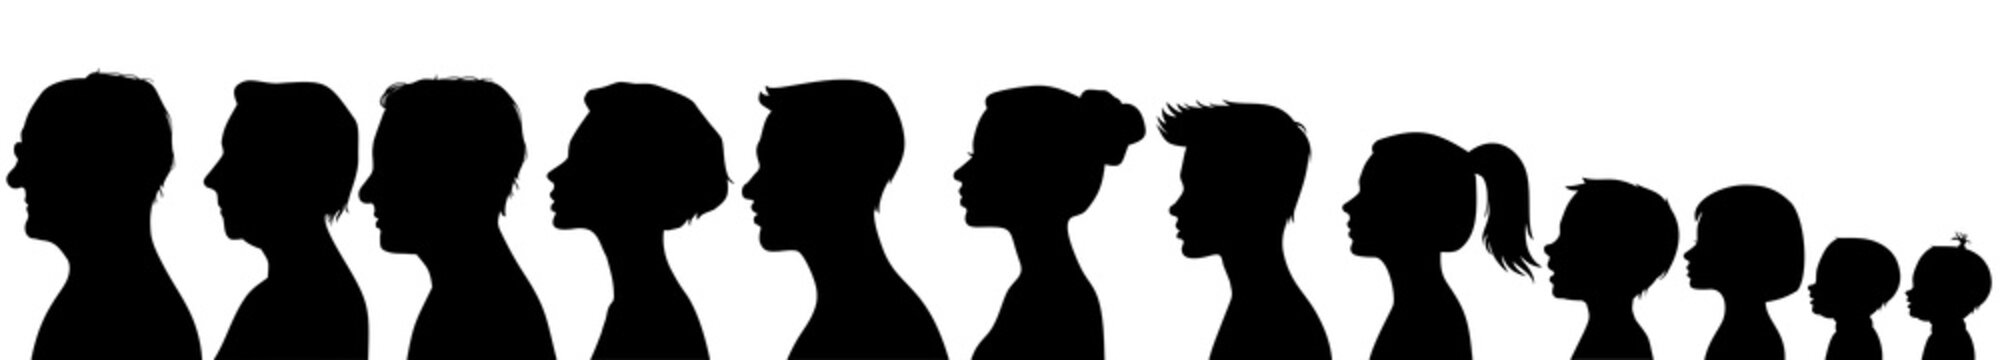 Head silhouettes of people. Black and white